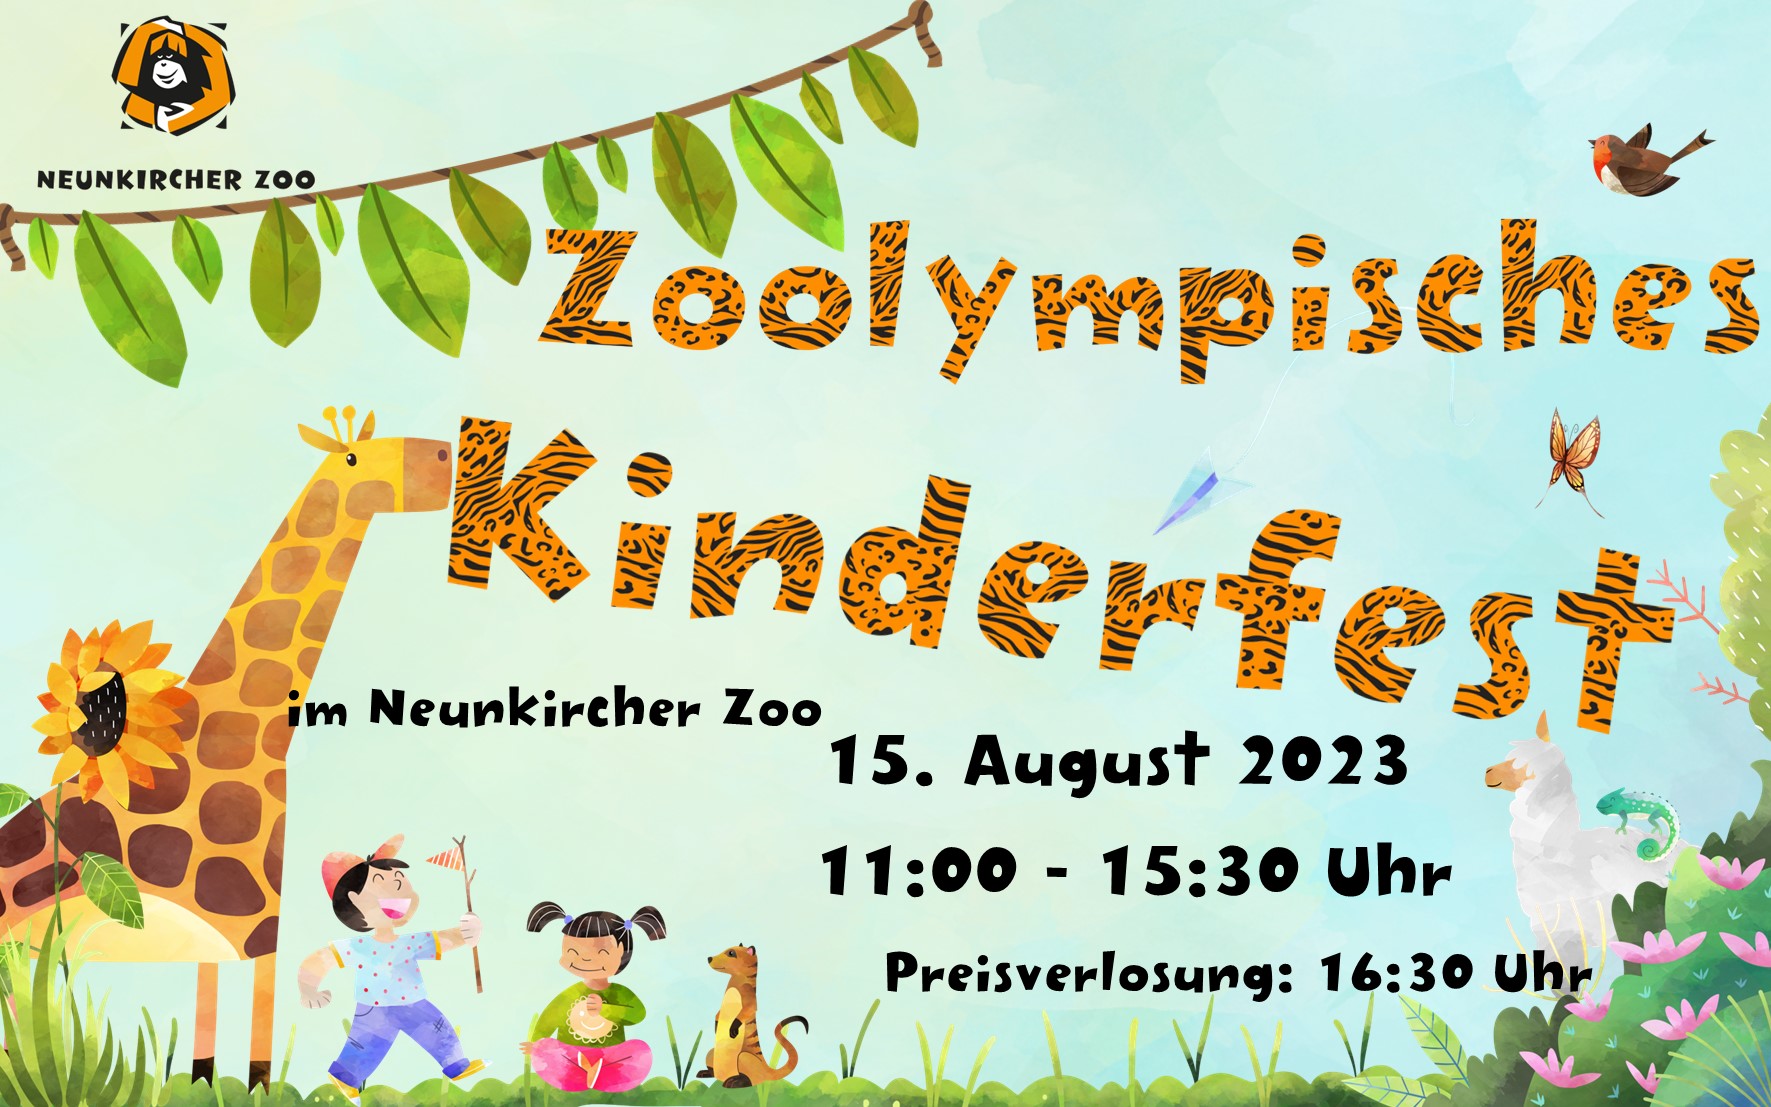 You are currently viewing Zoolympisches Kinderfest 2023